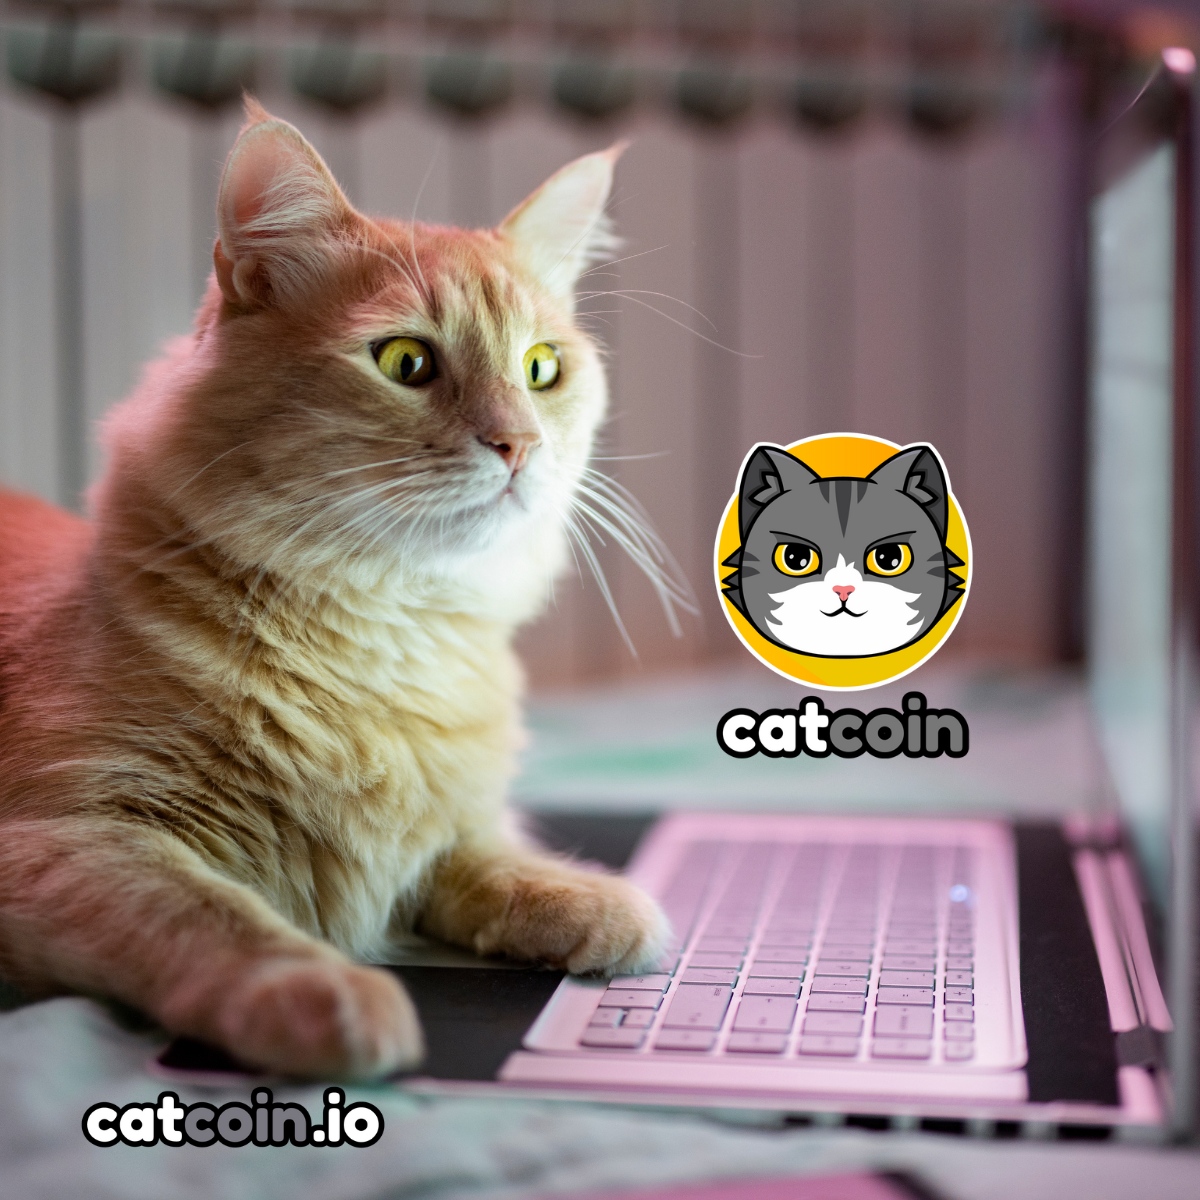 If $CATS could be your #crypto consultant, they'd make sure you have #Catcoin.